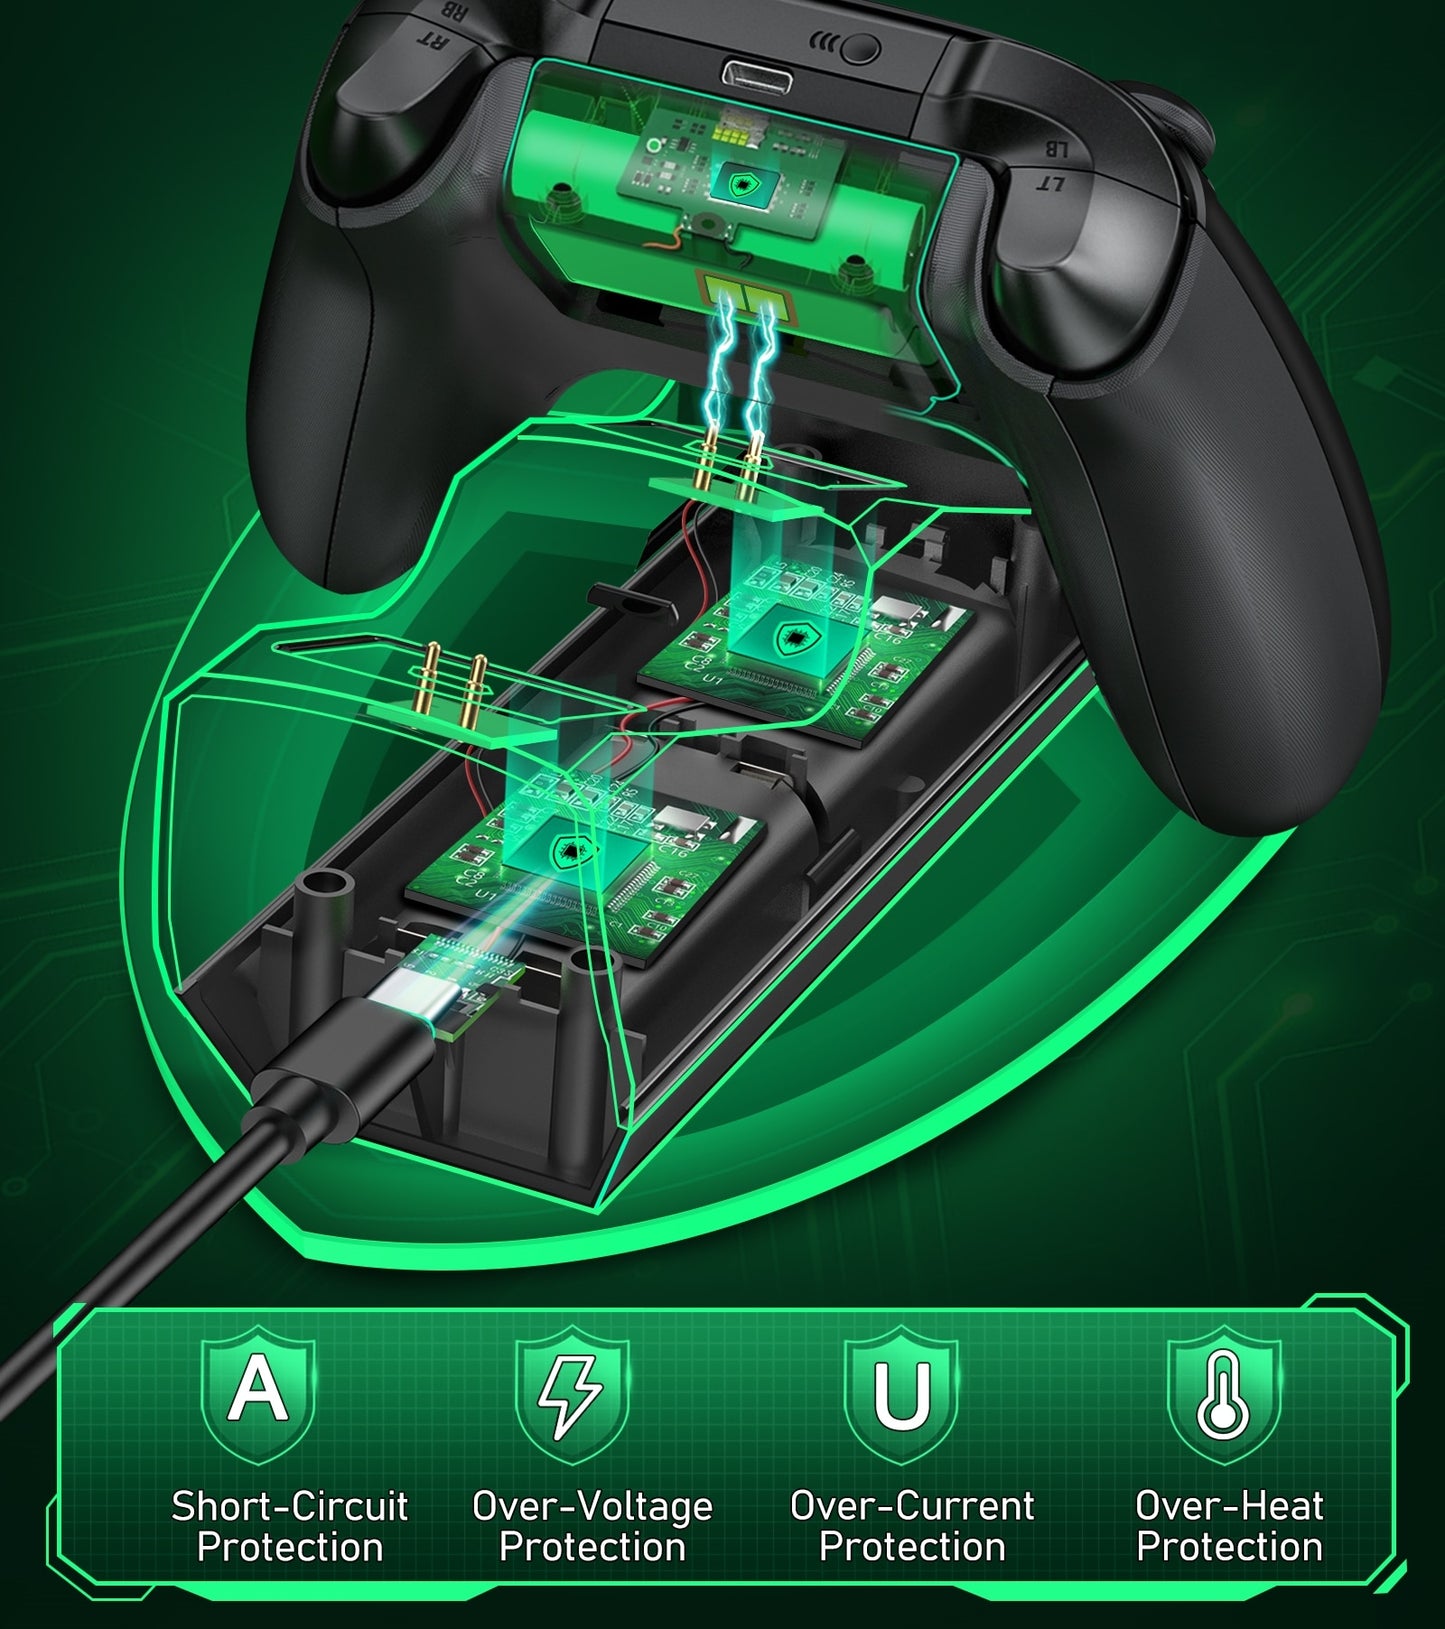 Efficient Dual Charger - Rechargeable Battery Pack for Xbox Controllers